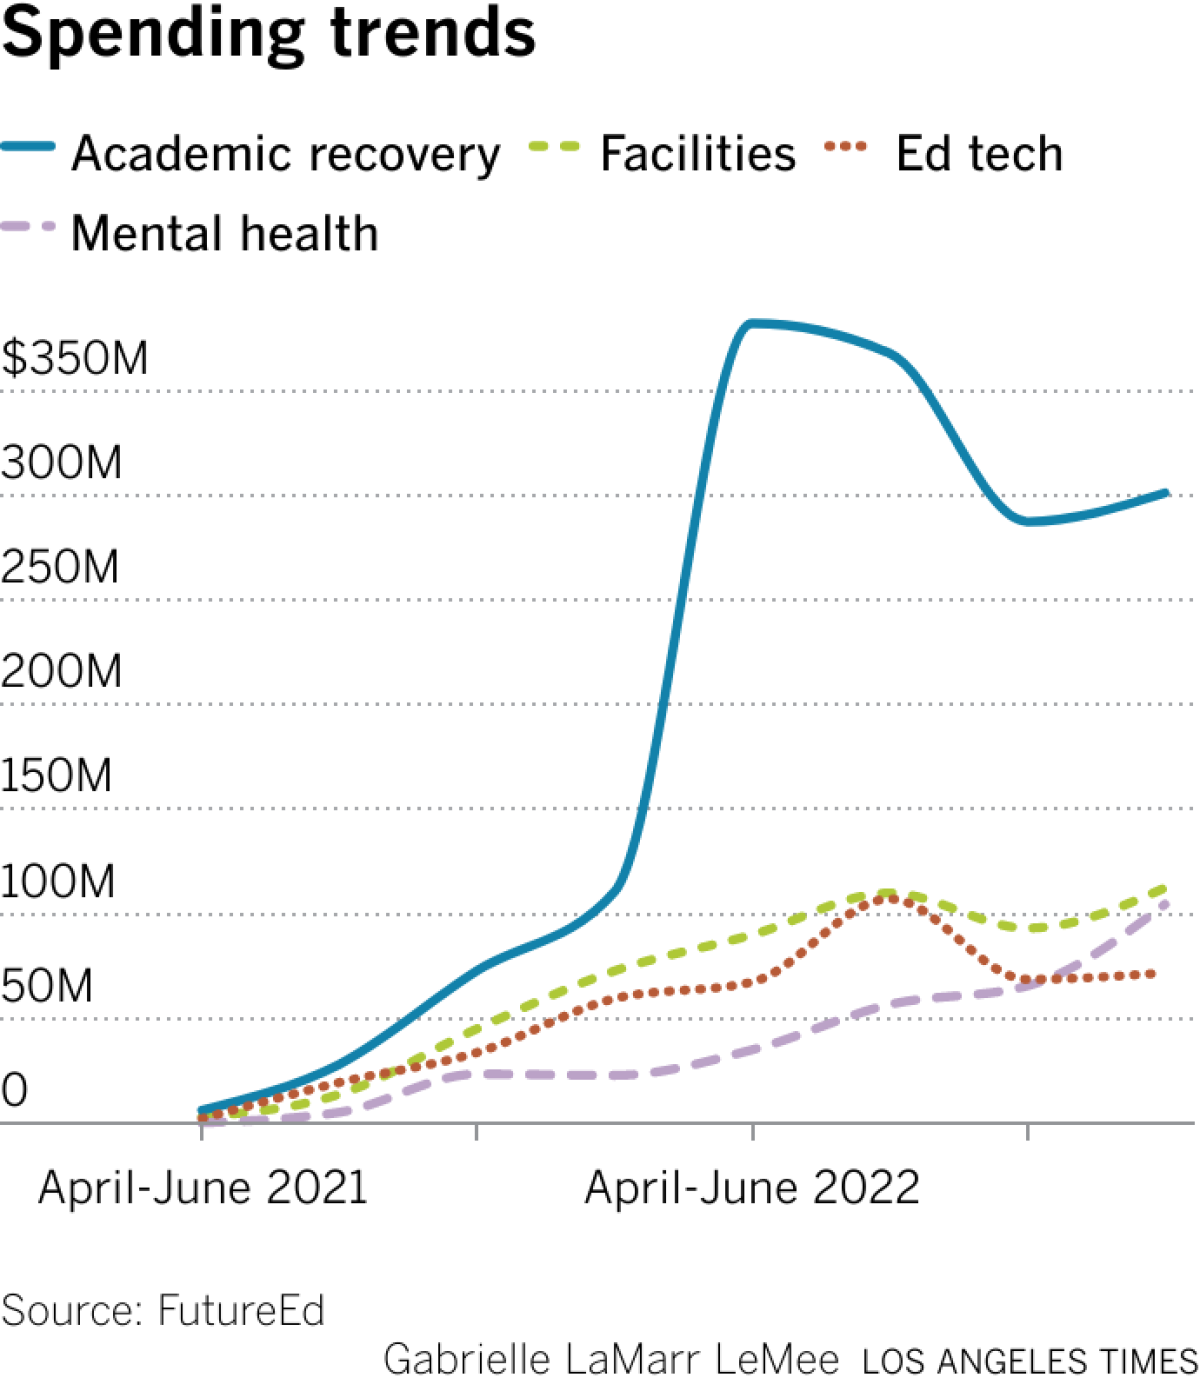 A line chart showing academic recovery spending over time broken into the top spending categories. All categories saw steady increases over time with the most dramatic increase in academic recovery during the summer of 2022. 